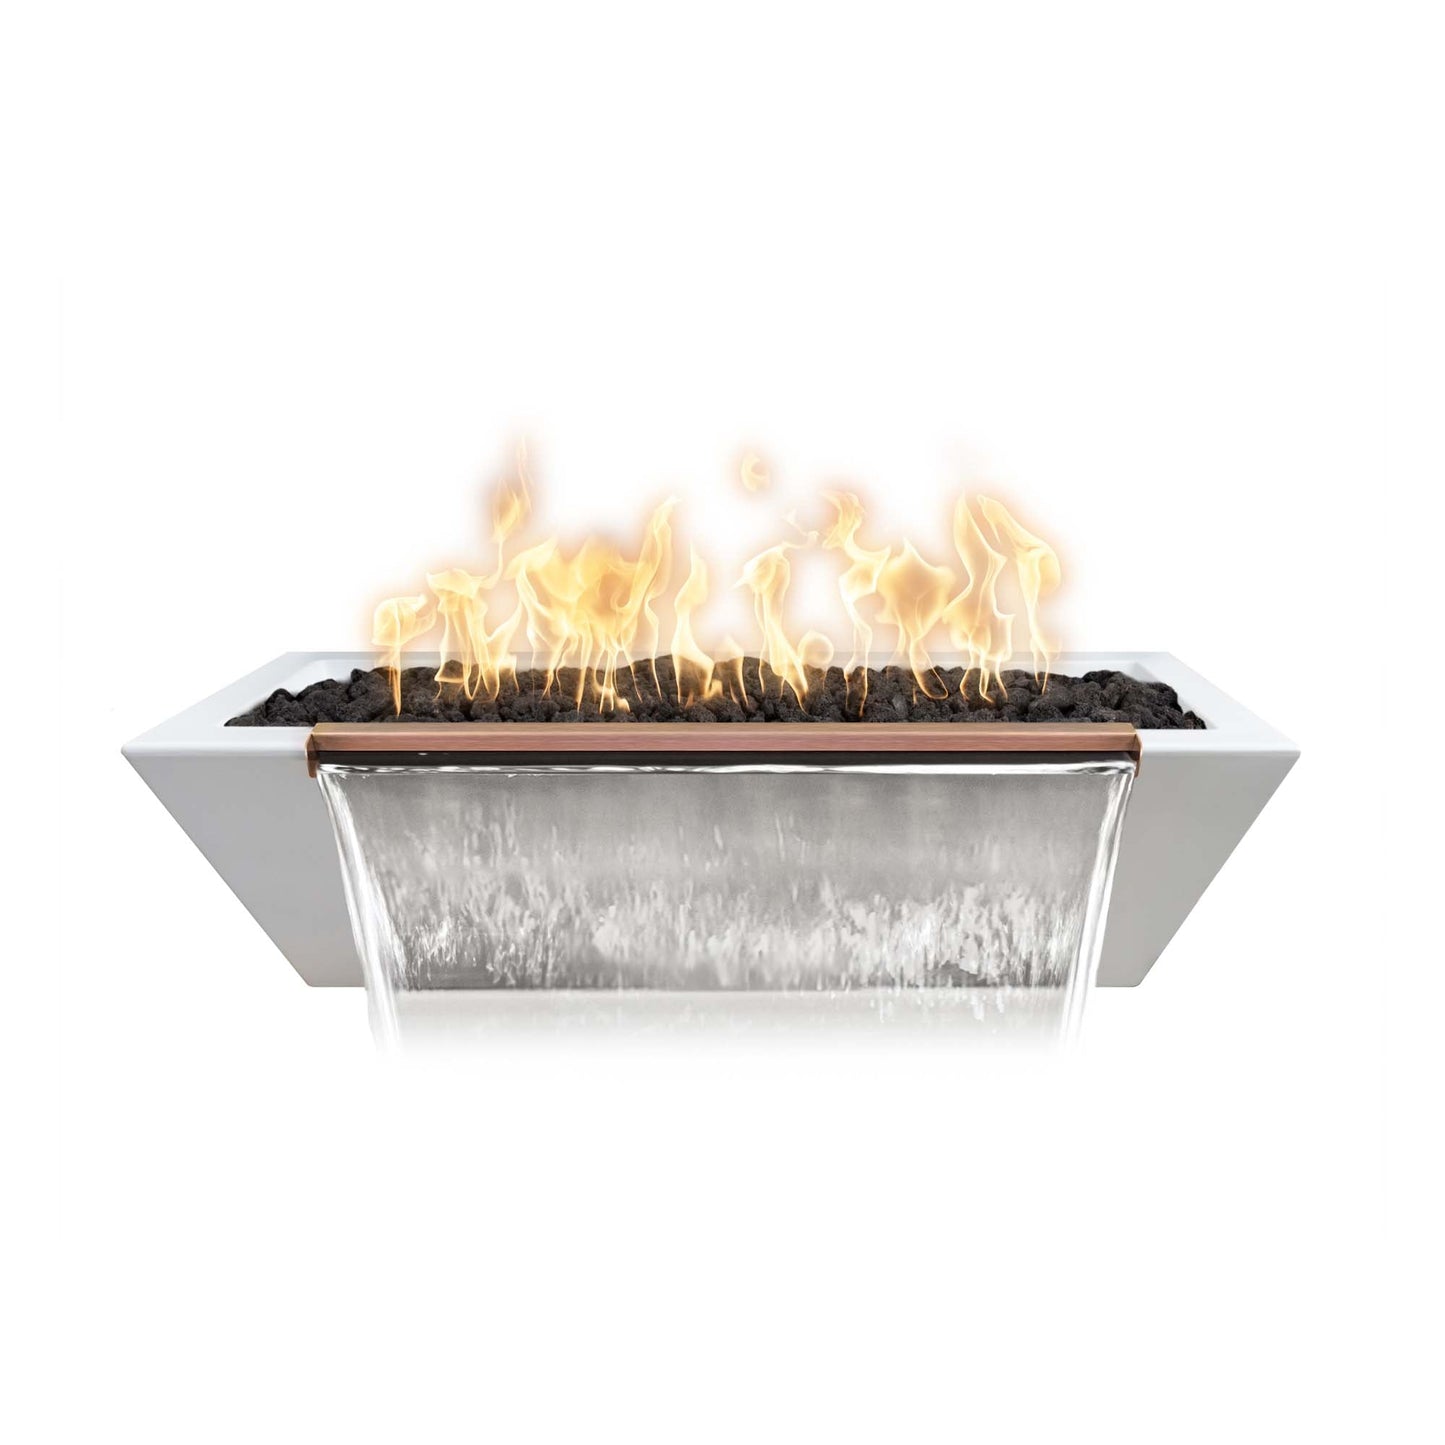 The Outdoor Plus Linear Maya 60" Chestnut GFRC Concrete Natural Gas Fire & Water Bowl with Match Lit Ignition